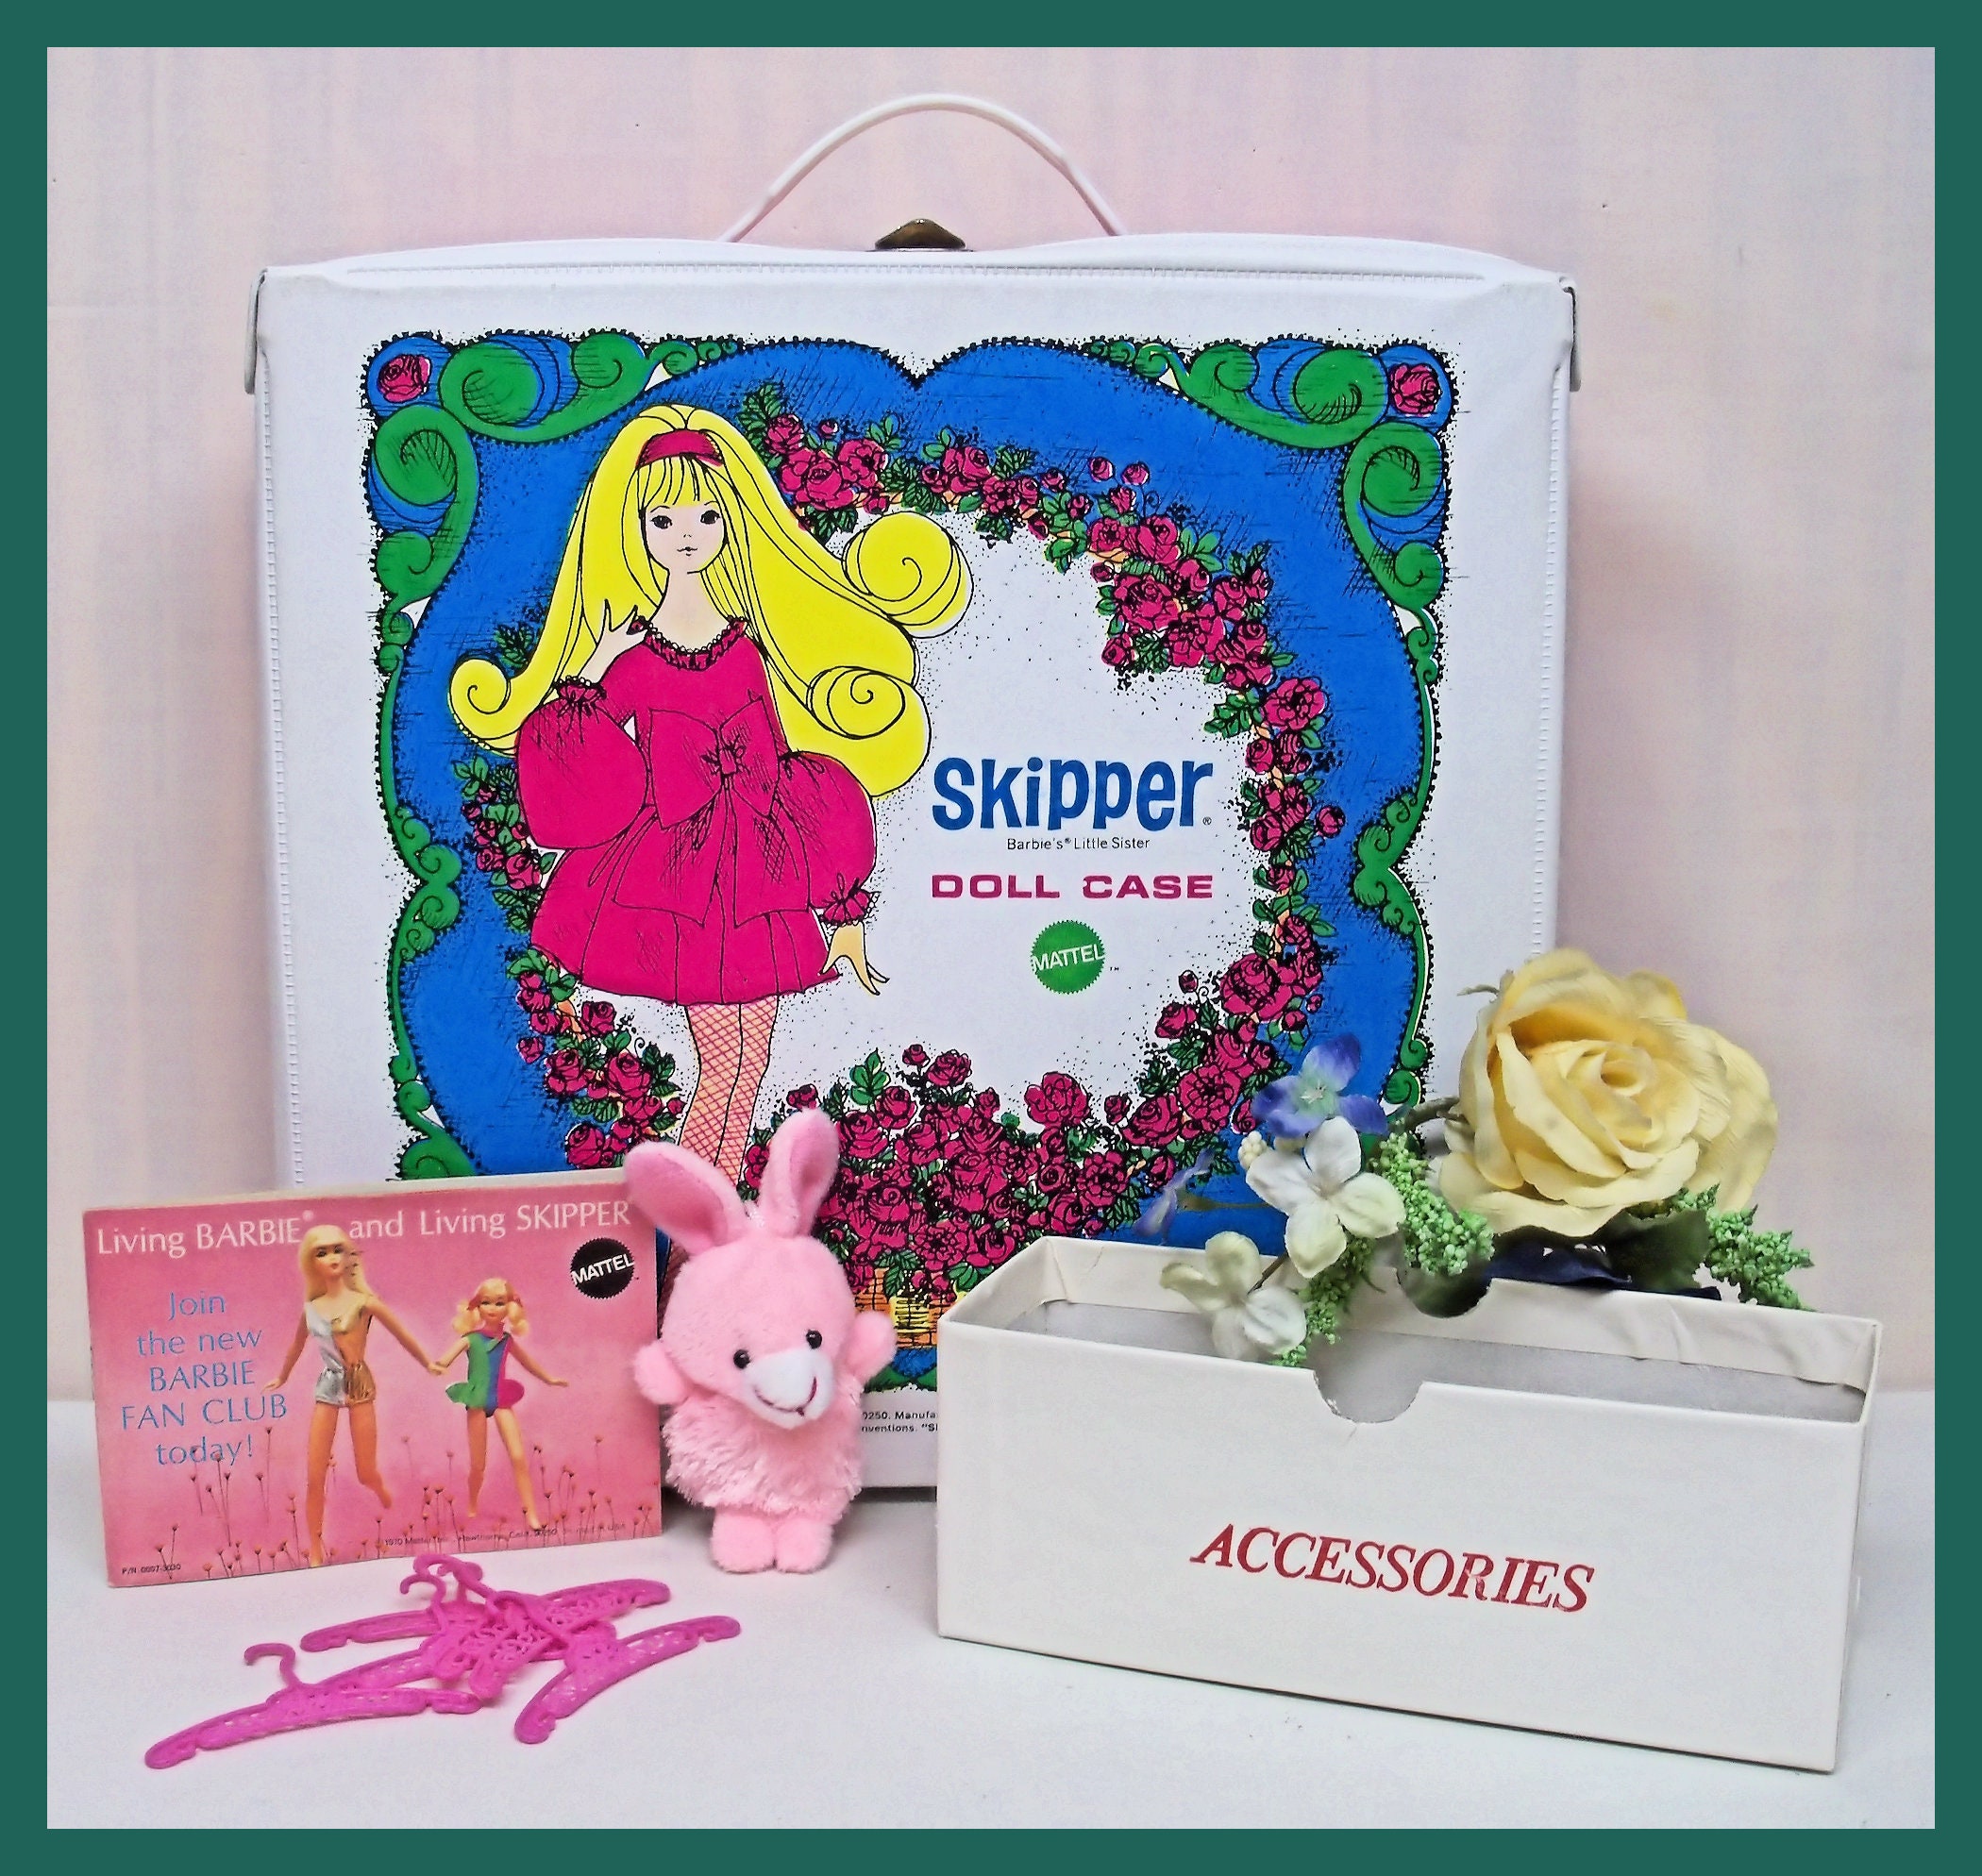 Personalized Barbie Accessory Storage Box, Barbie Dreamhouse organization,  Double sided and a great gift for girls or Barbie collectors!